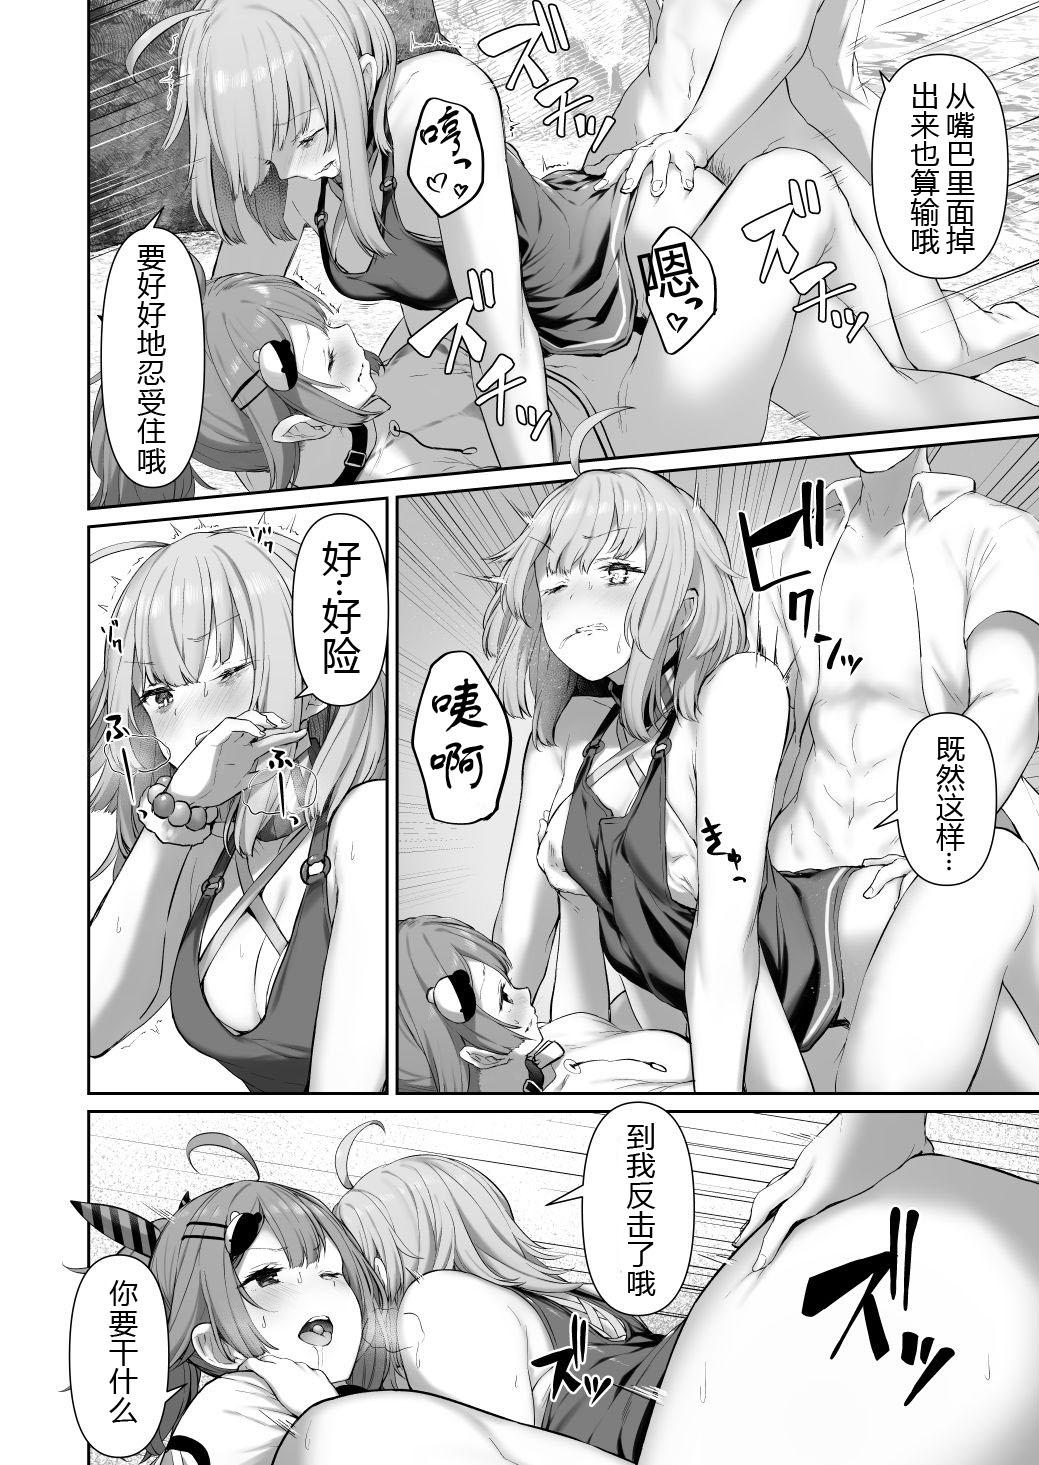 Porn Blow Jobs MP7 and AA-12 no - Girls frontline Harcore - Page 10